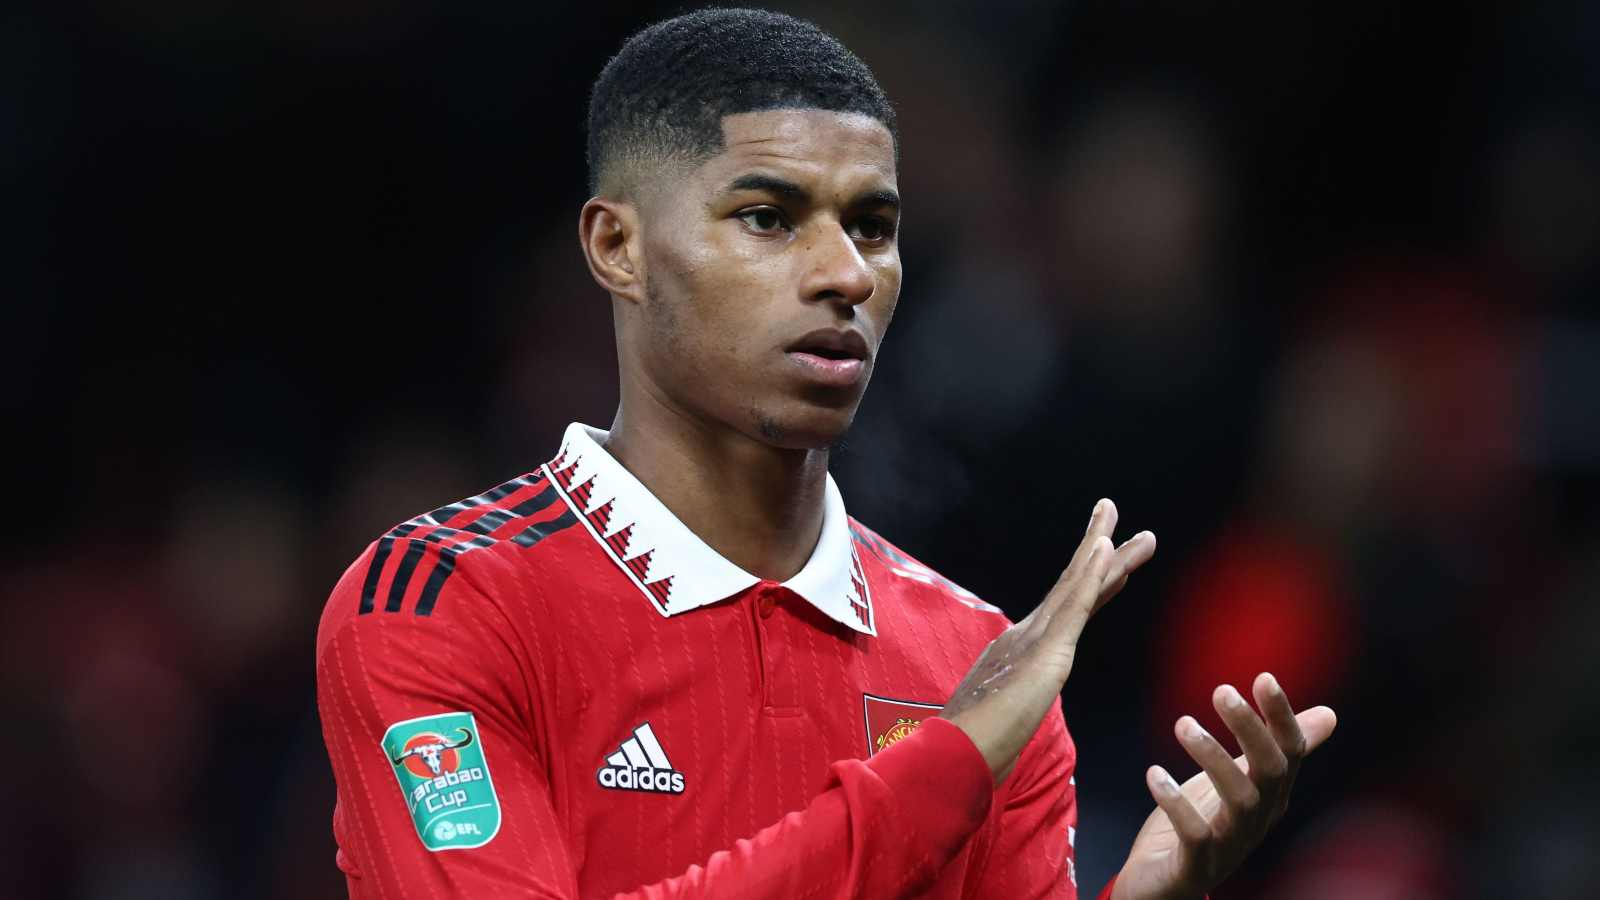 Rashford Extends his Contract with Man Utd until 2028